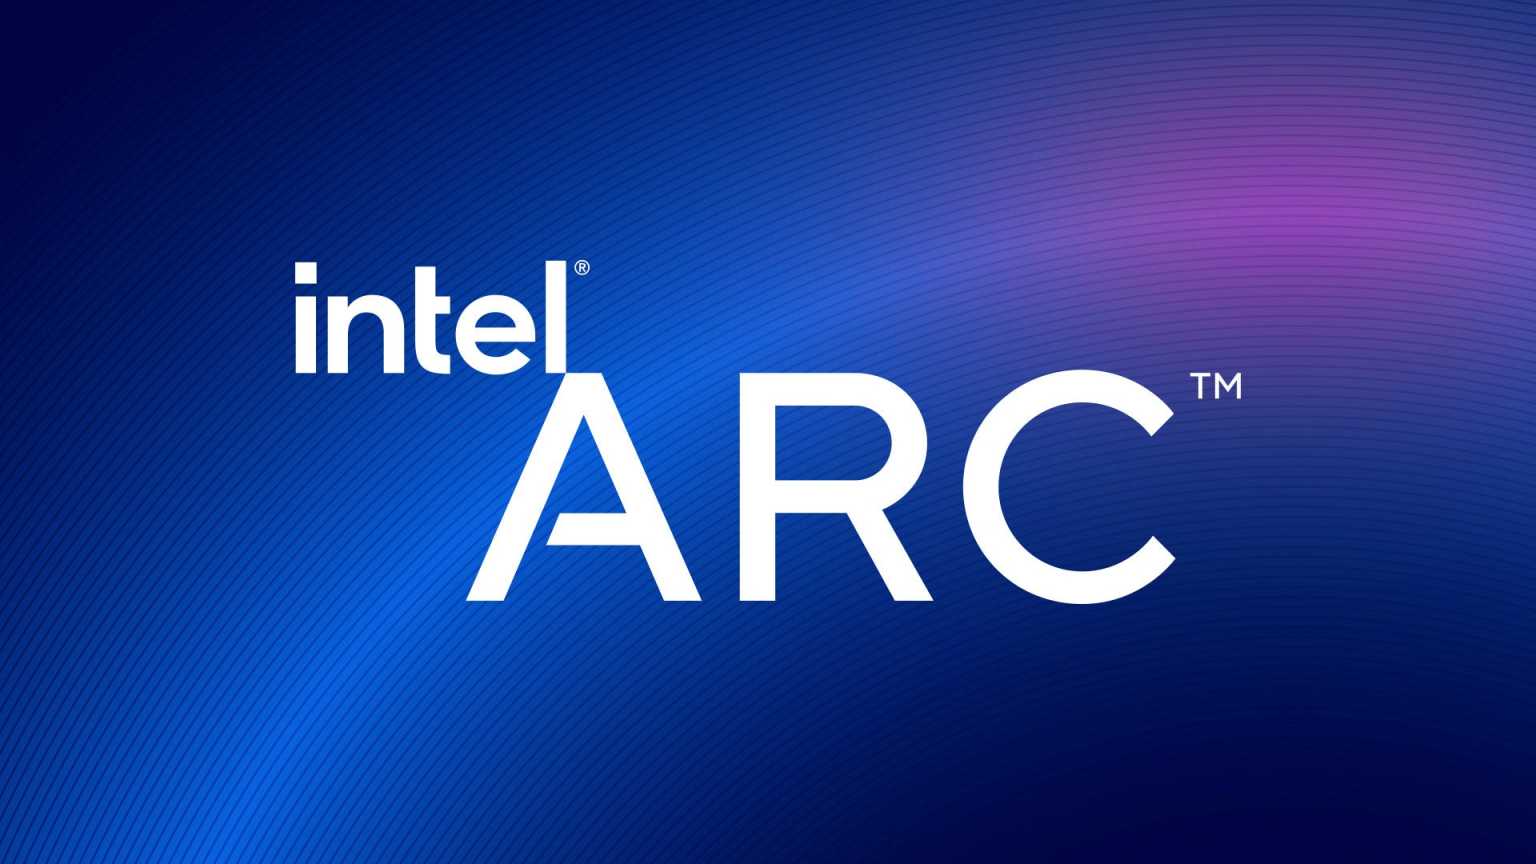 Intel will open its Arc GPUs on March 30